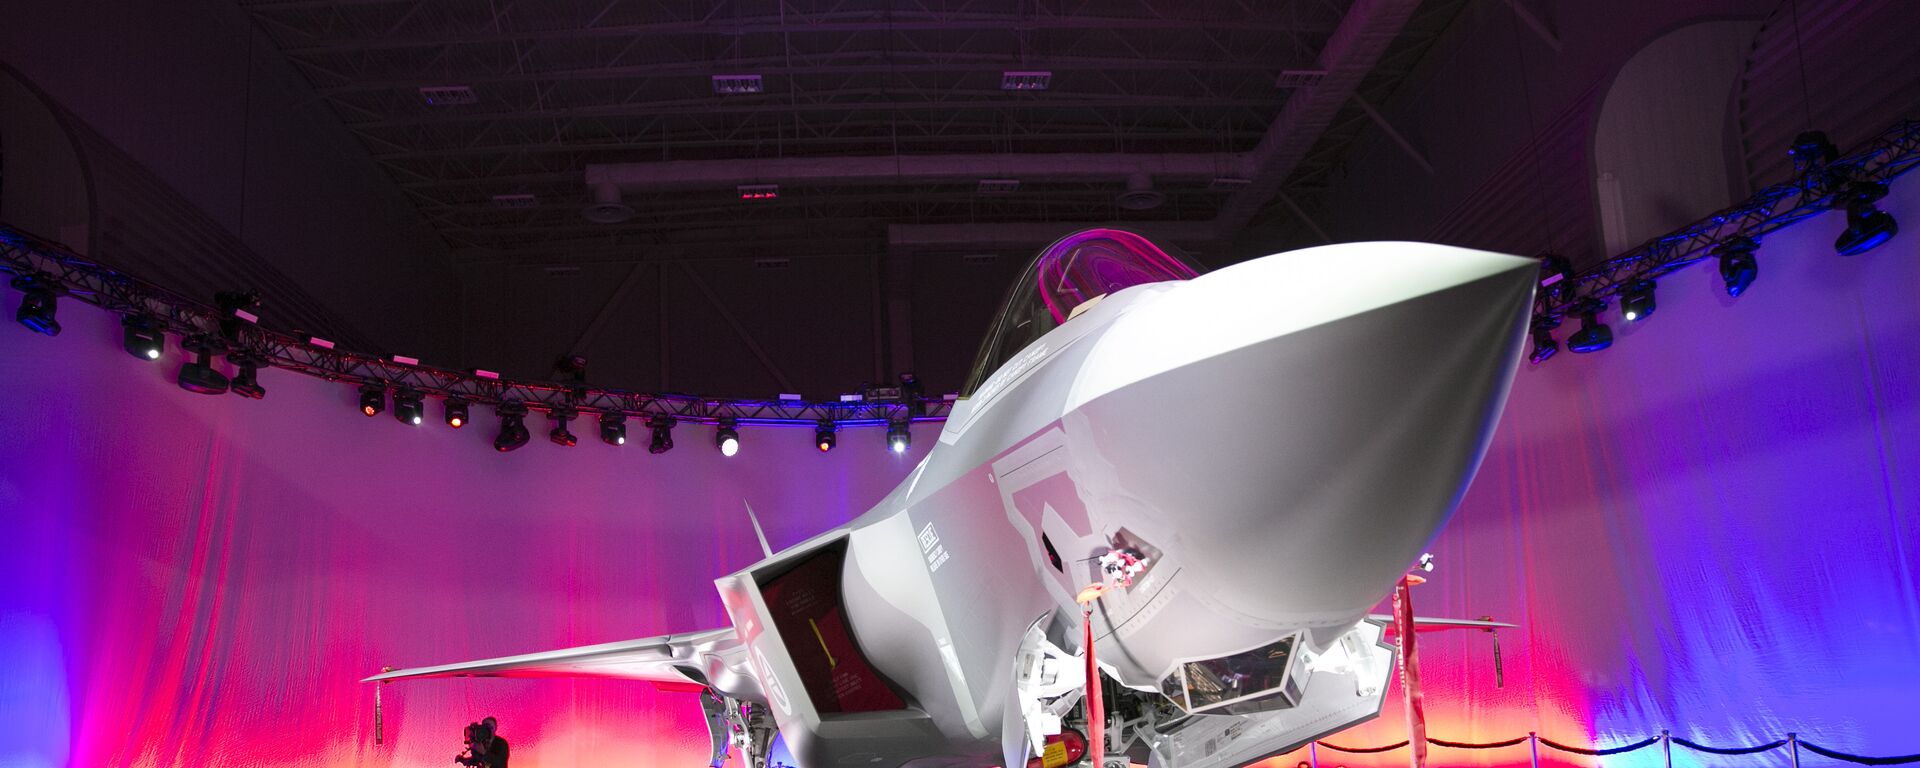 First Norwegian Armed Forces Lockheed Martin F-35A Lightning II, known as AM-1 Joint Strike Jet Fighter, is unveiled during the rollout celebration at Lockheed Martin production facility in Fort Worth, TX, on Tuesday, Sep. 22, 2015 - Sputnik International, 1920, 08.12.2021